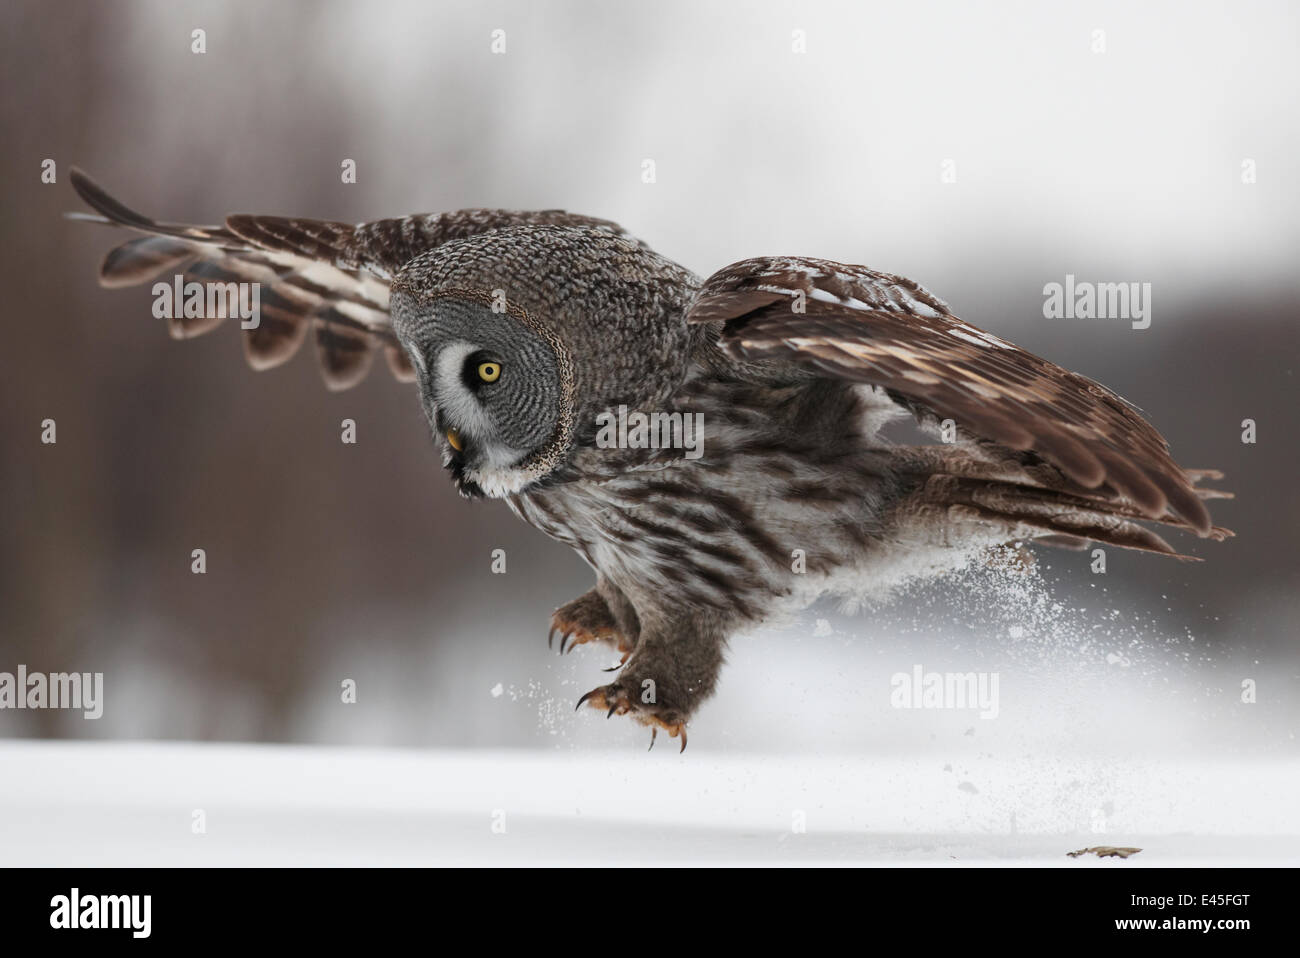 Female Great grey owl (Strix nebulosa) landing on snow, Oulu, Finland, February 2009  Not to be supplied to Italian magazines or newspapers until 25th October 2010. Stock Photo